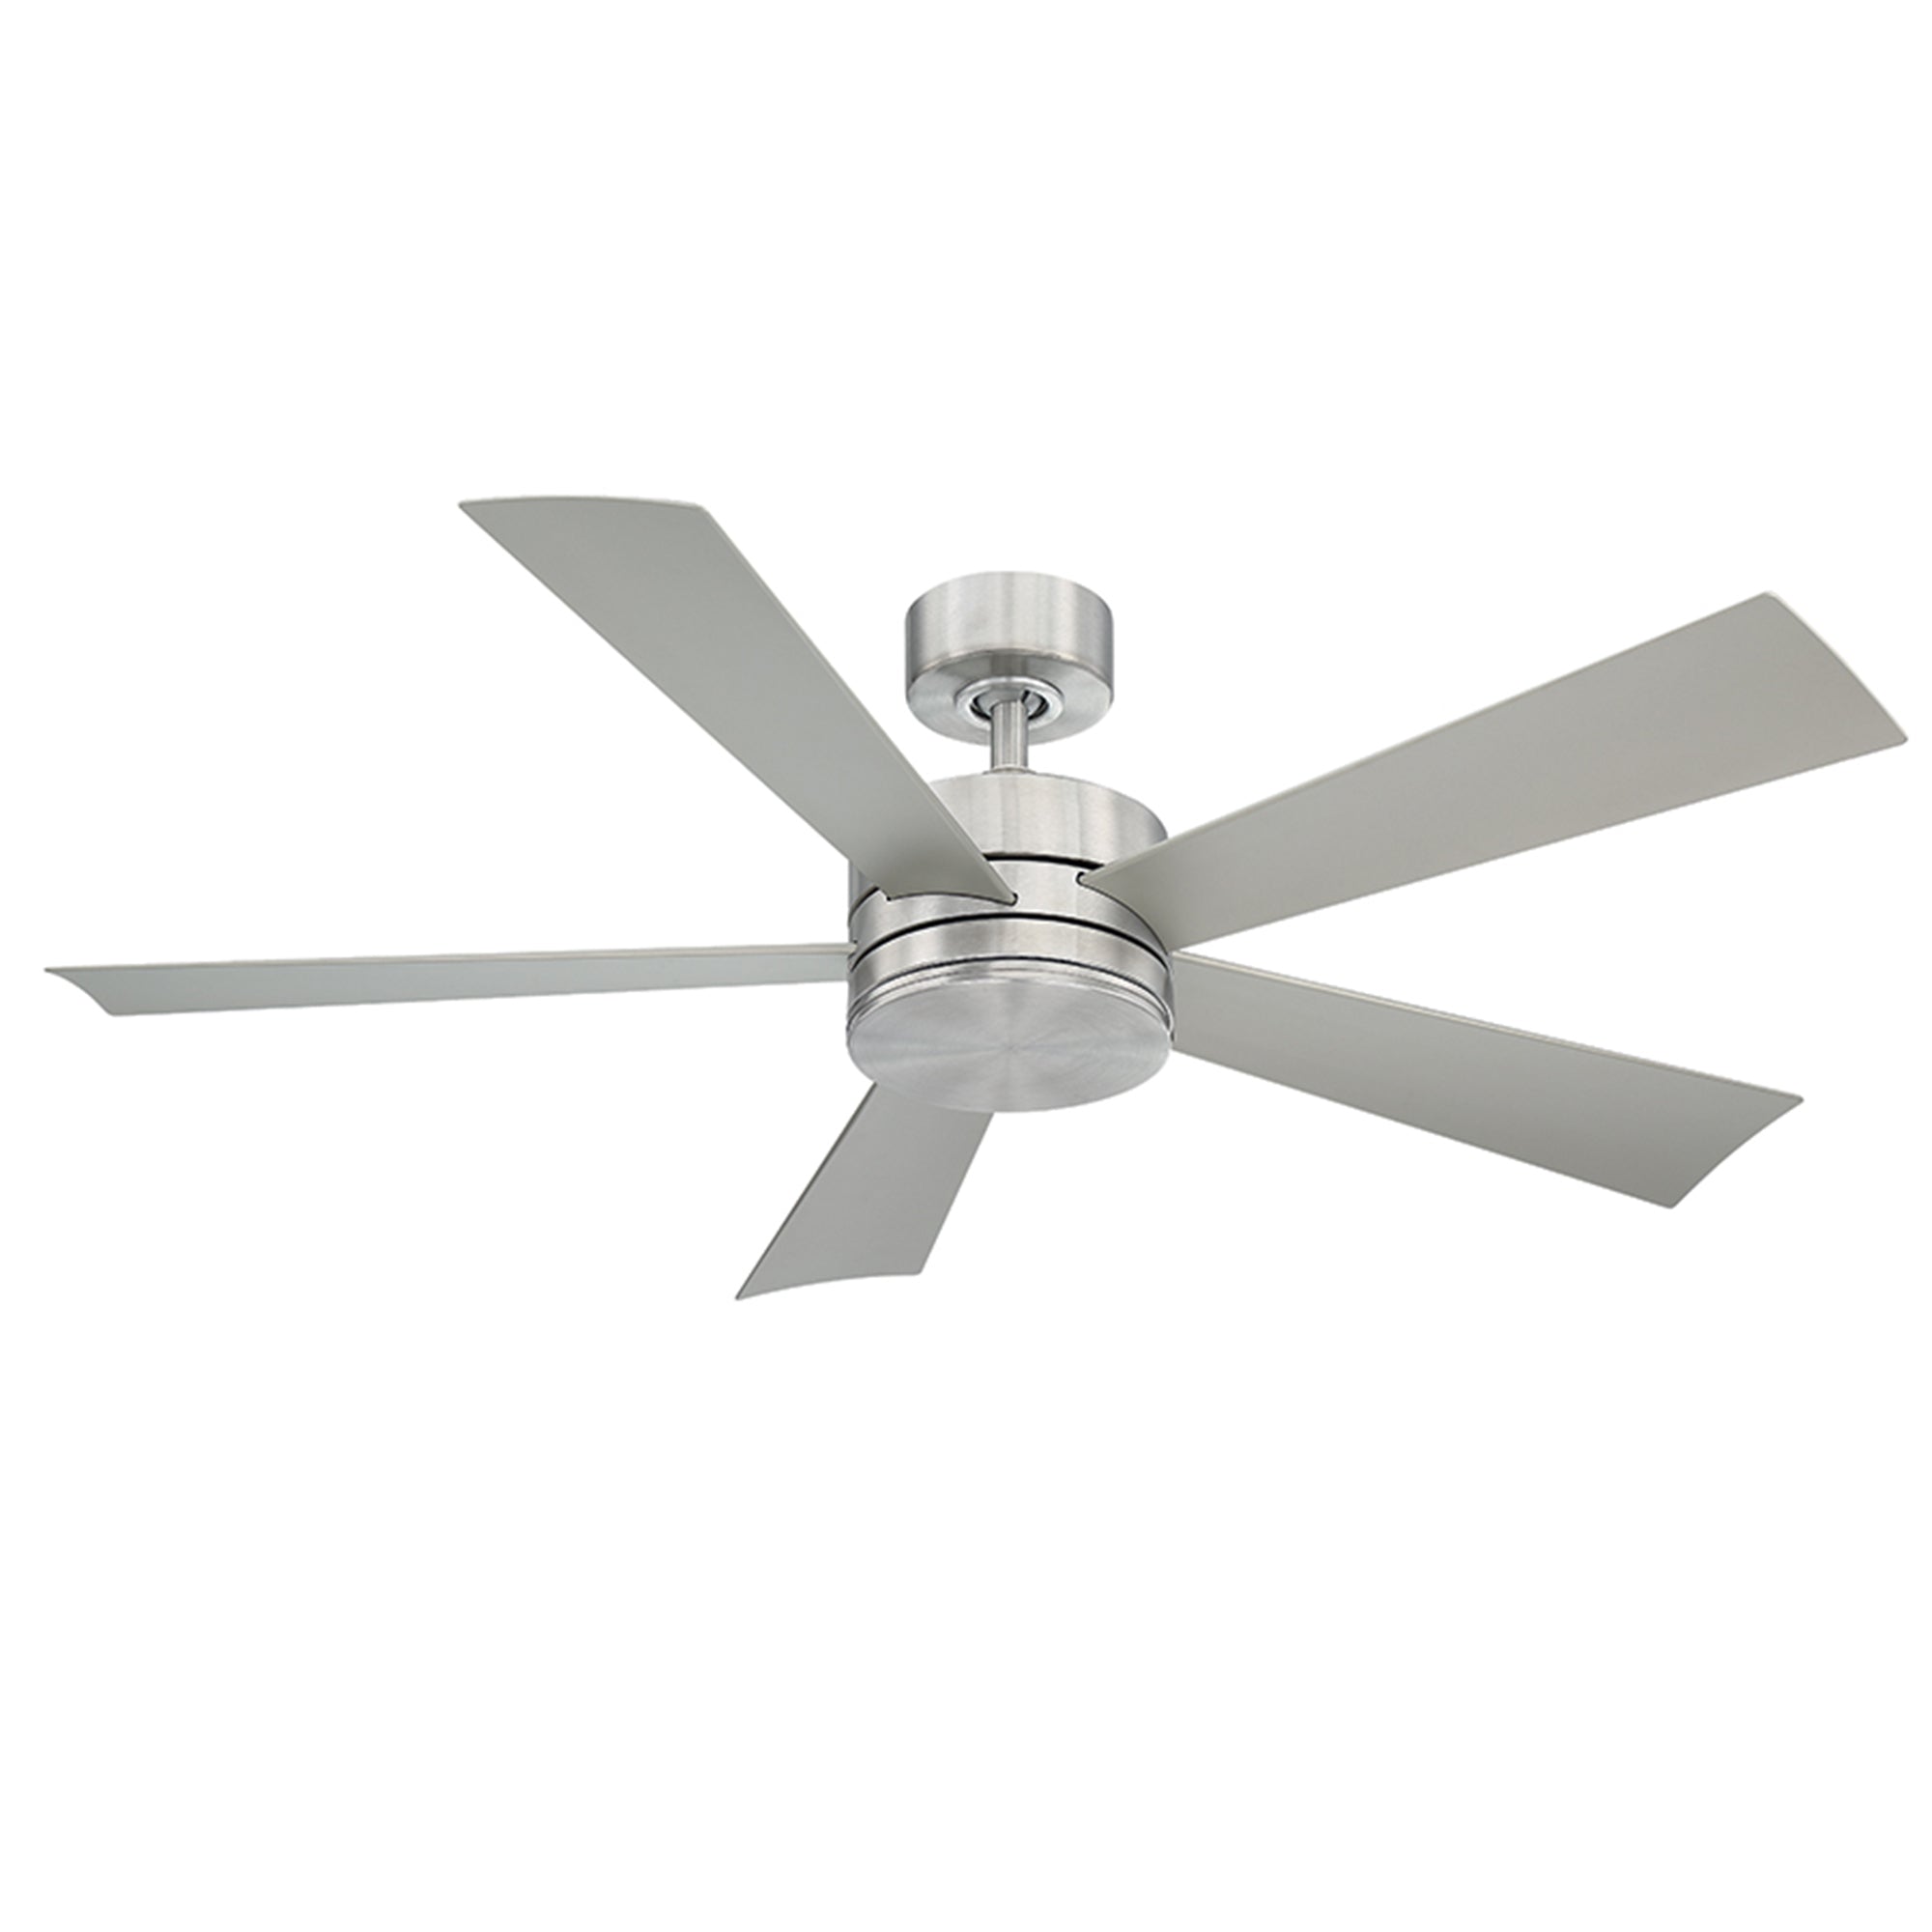 Wynd Indoor/Outdoor 5-Blade 52" Smart Ceiling Fan with LED Light Kit and Remote Control